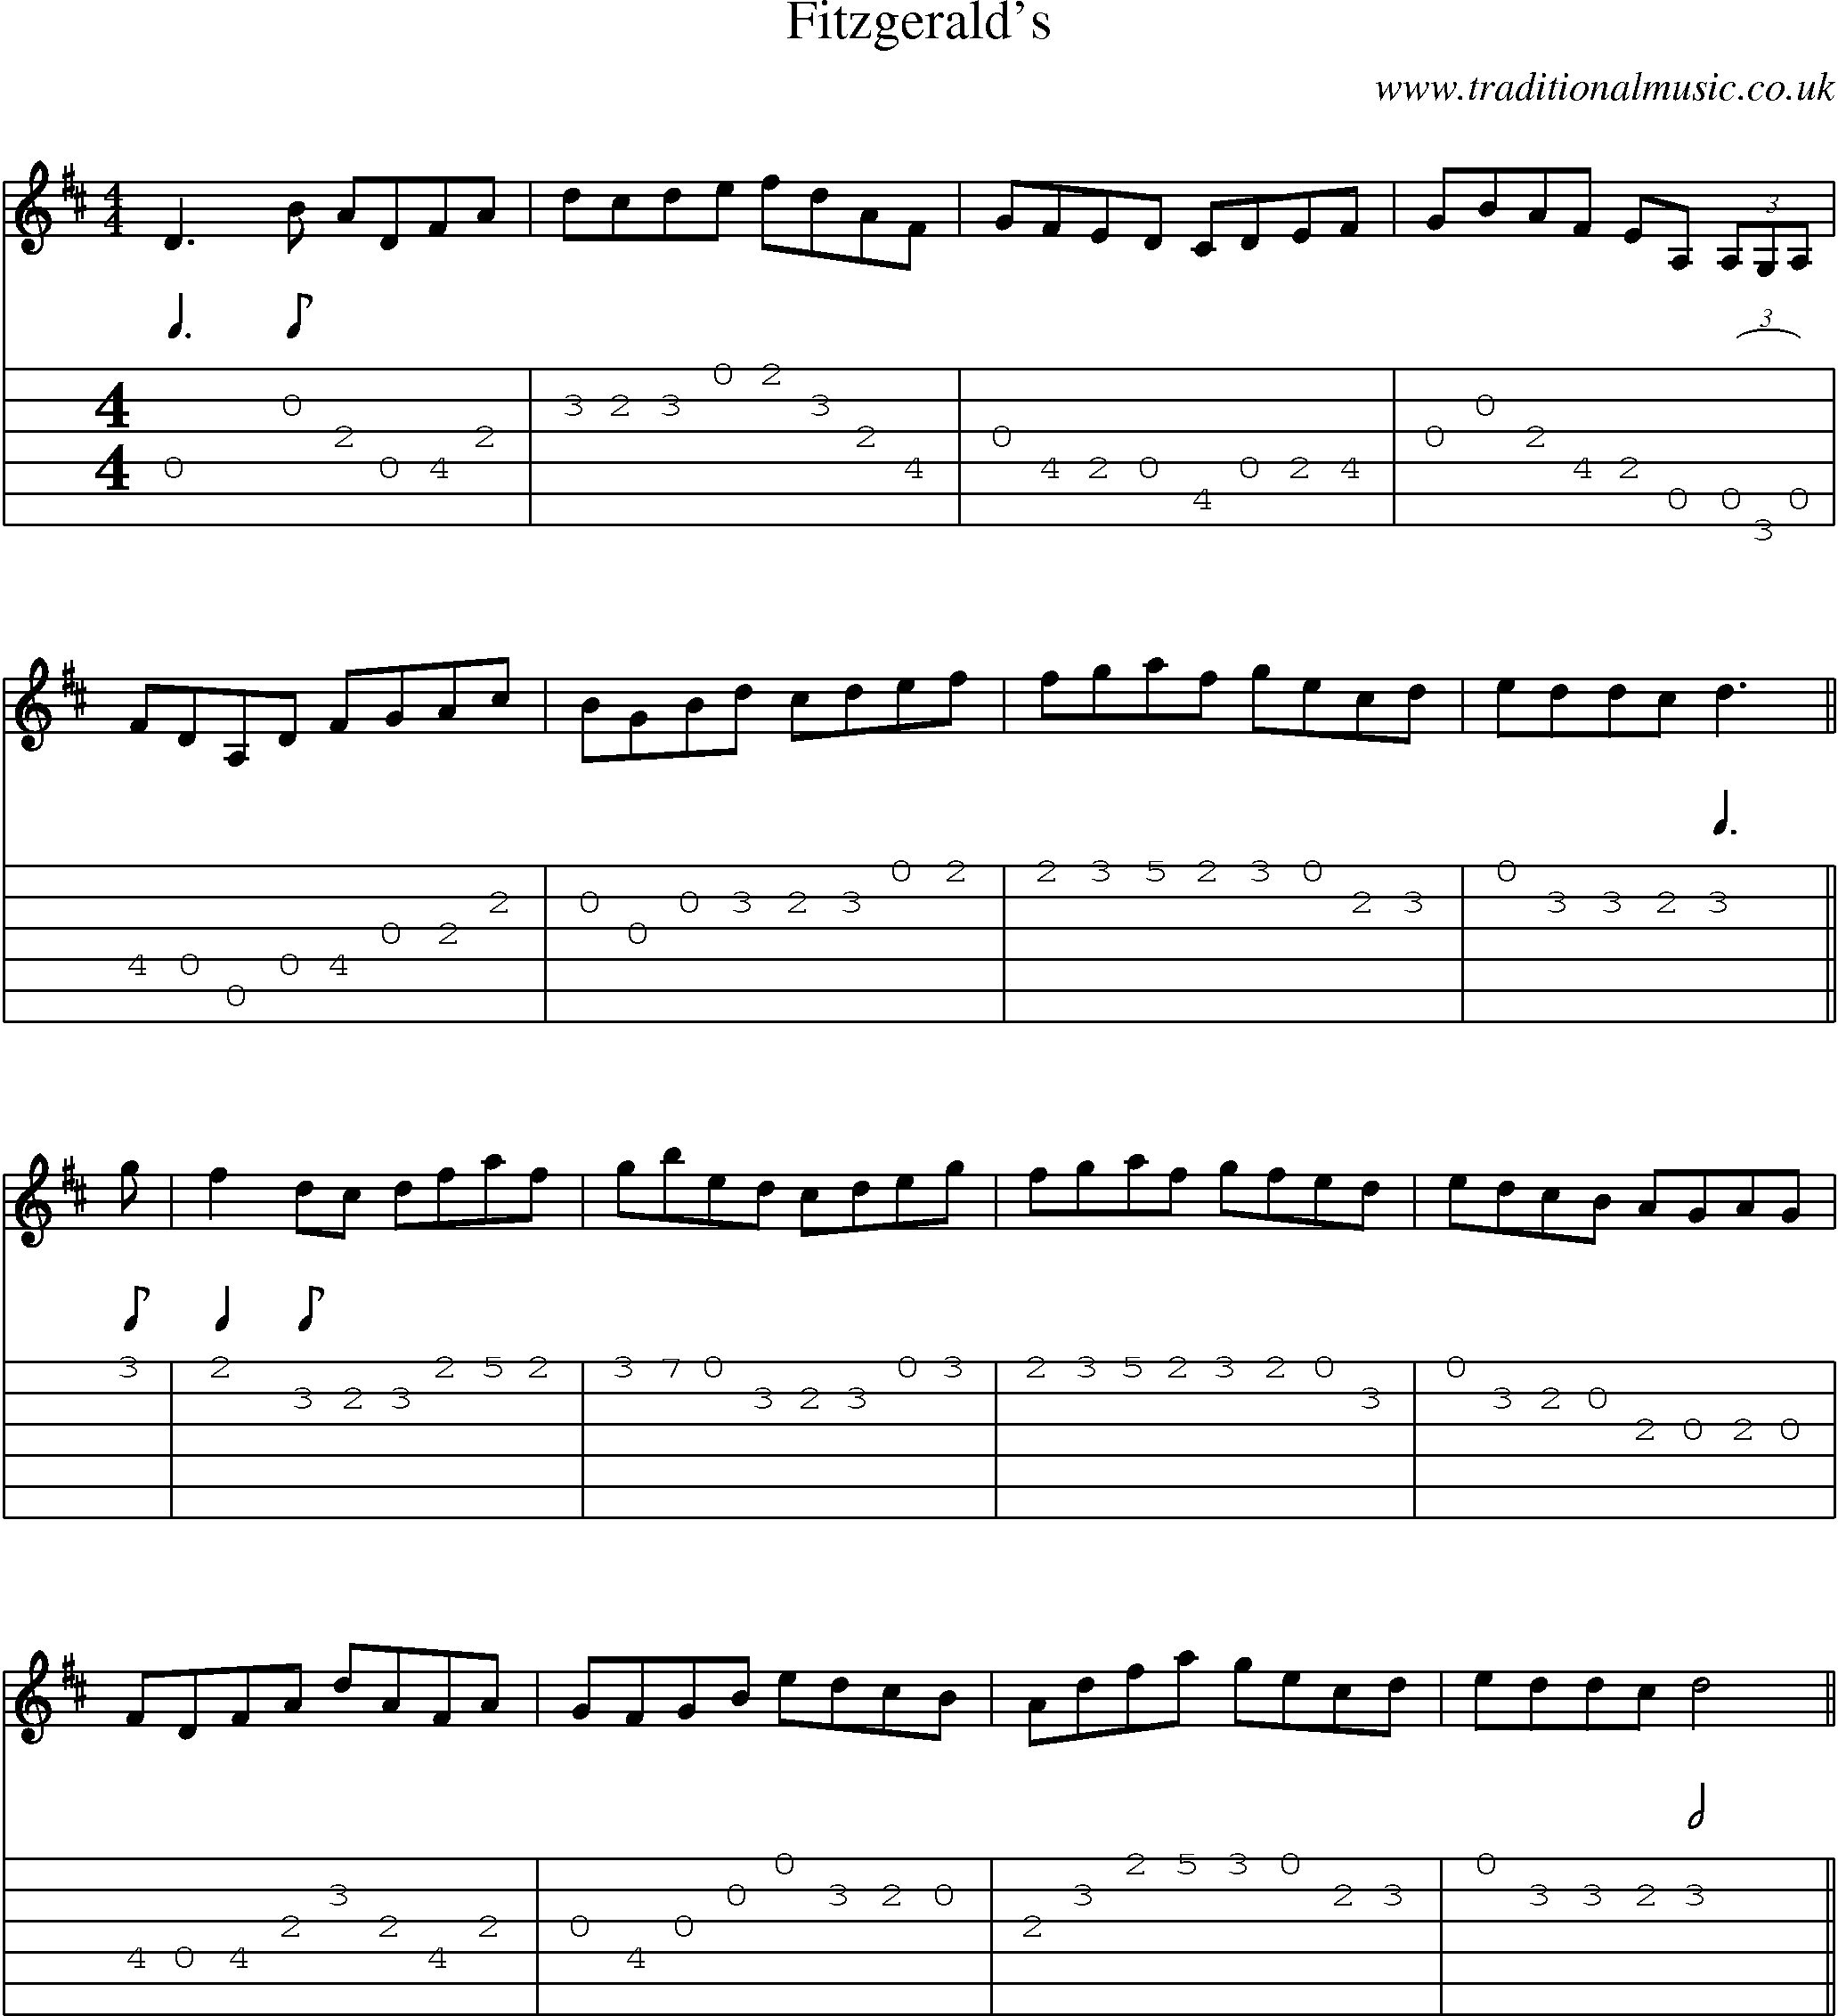 Music Score and Guitar Tabs for Fitzgeralds